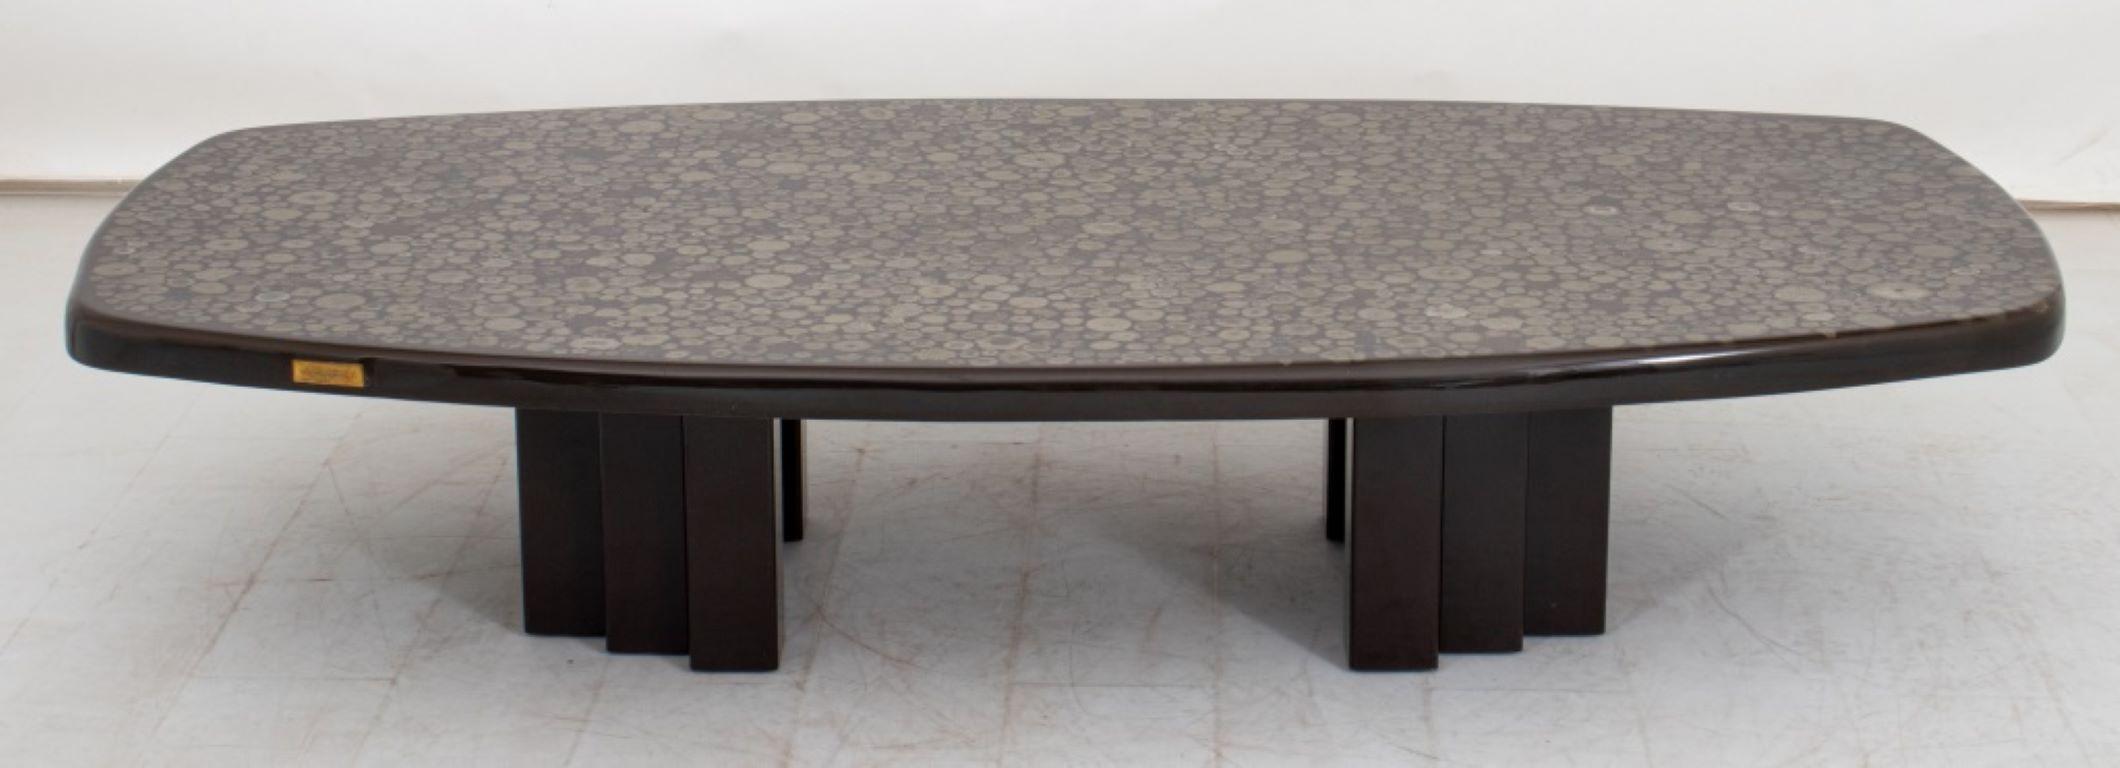 Christian Urekels Belgian Modern Coffee Table, signed to plaque on edge, resin top with inlaid pyrite or mica above enameled steel base. 

Dealer: S138XX